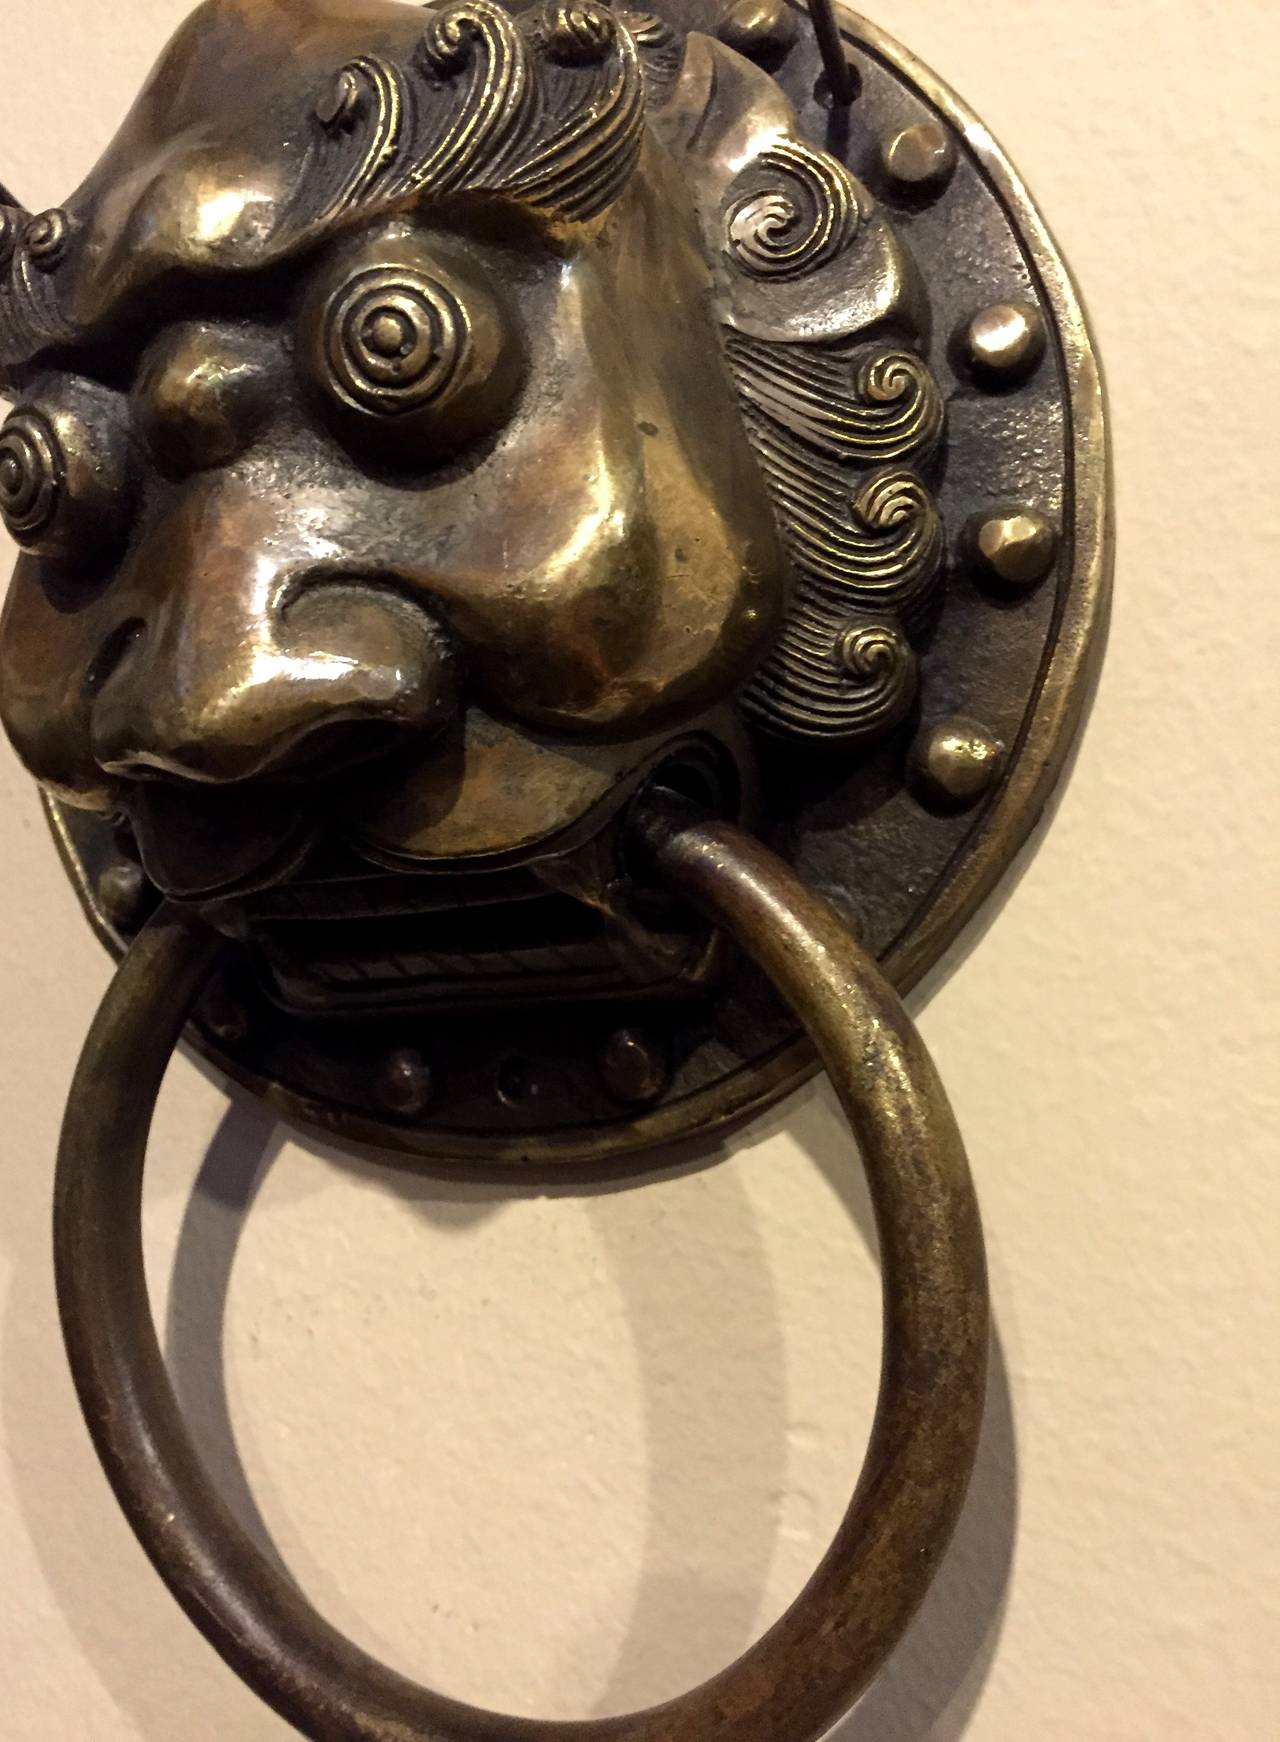 Our brass knockers can be used as door knockers or hand towel rings. Fine craftsmanship depict the ancient mythical guardians with a high level of artistic expression. 

Used singularly or in pairs, these fantastic pieces bring a sense of